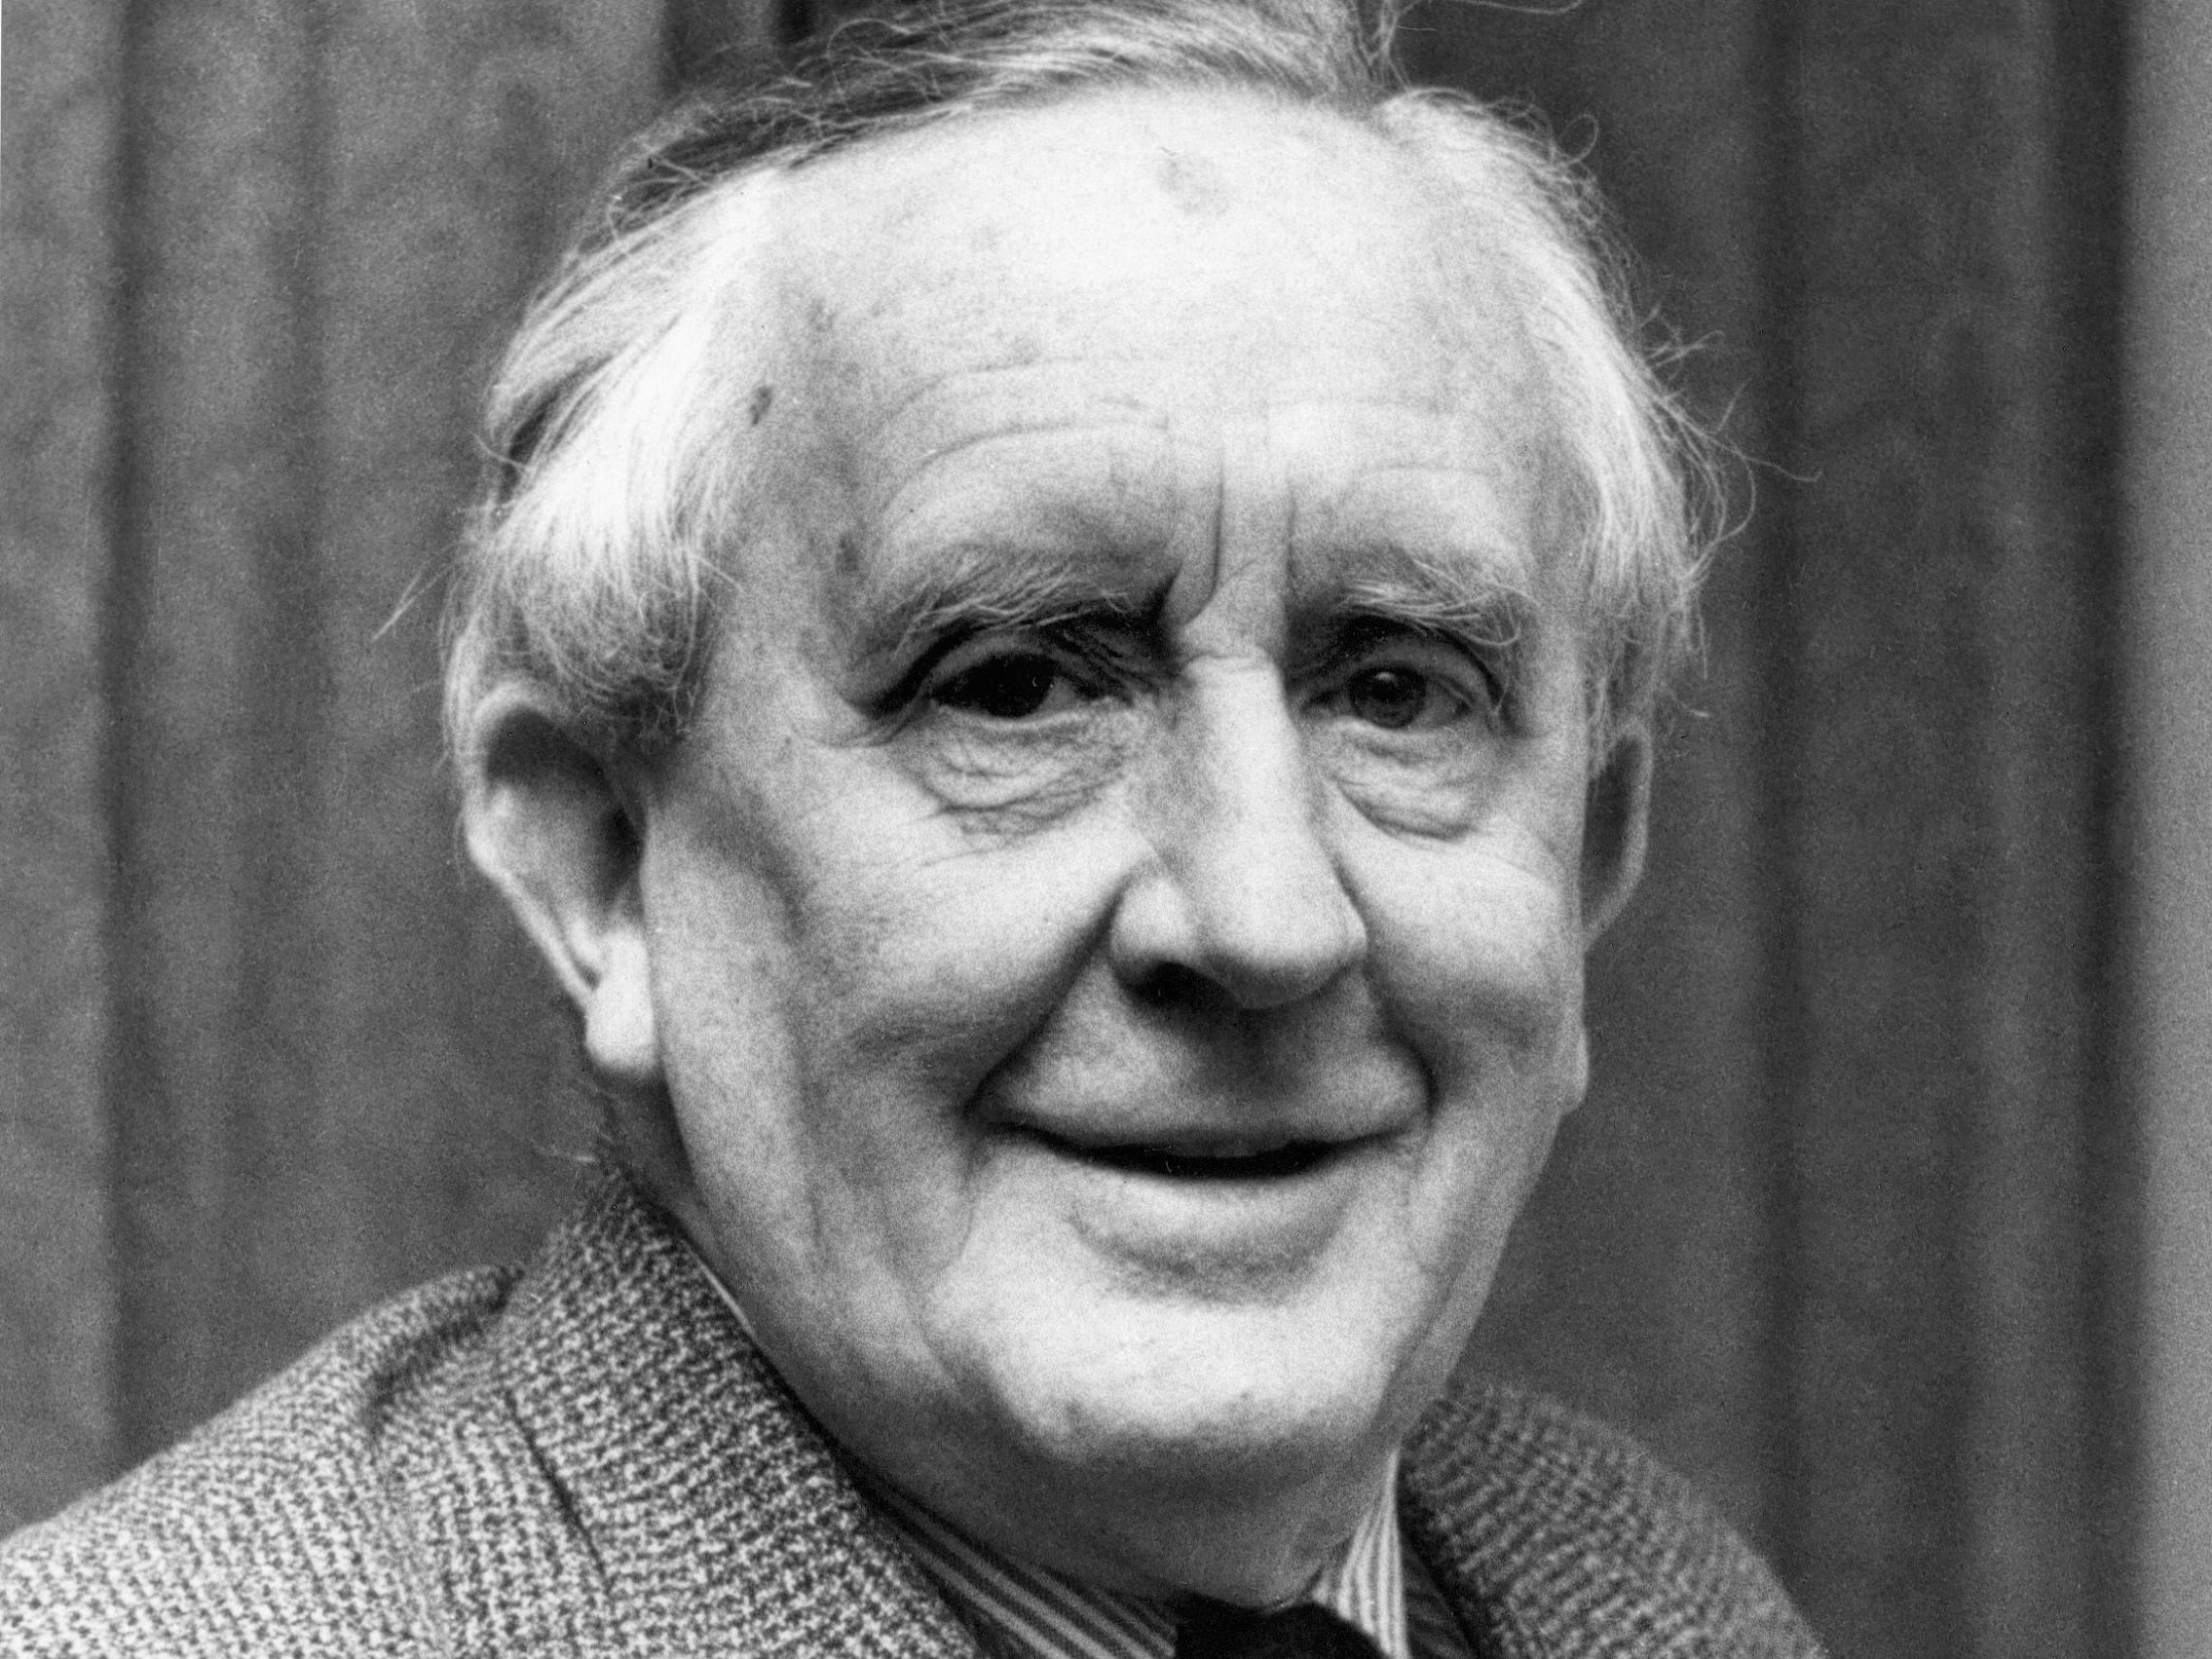 JRR Tolkien, an academic and philologist, called his imagined world Middle-earth